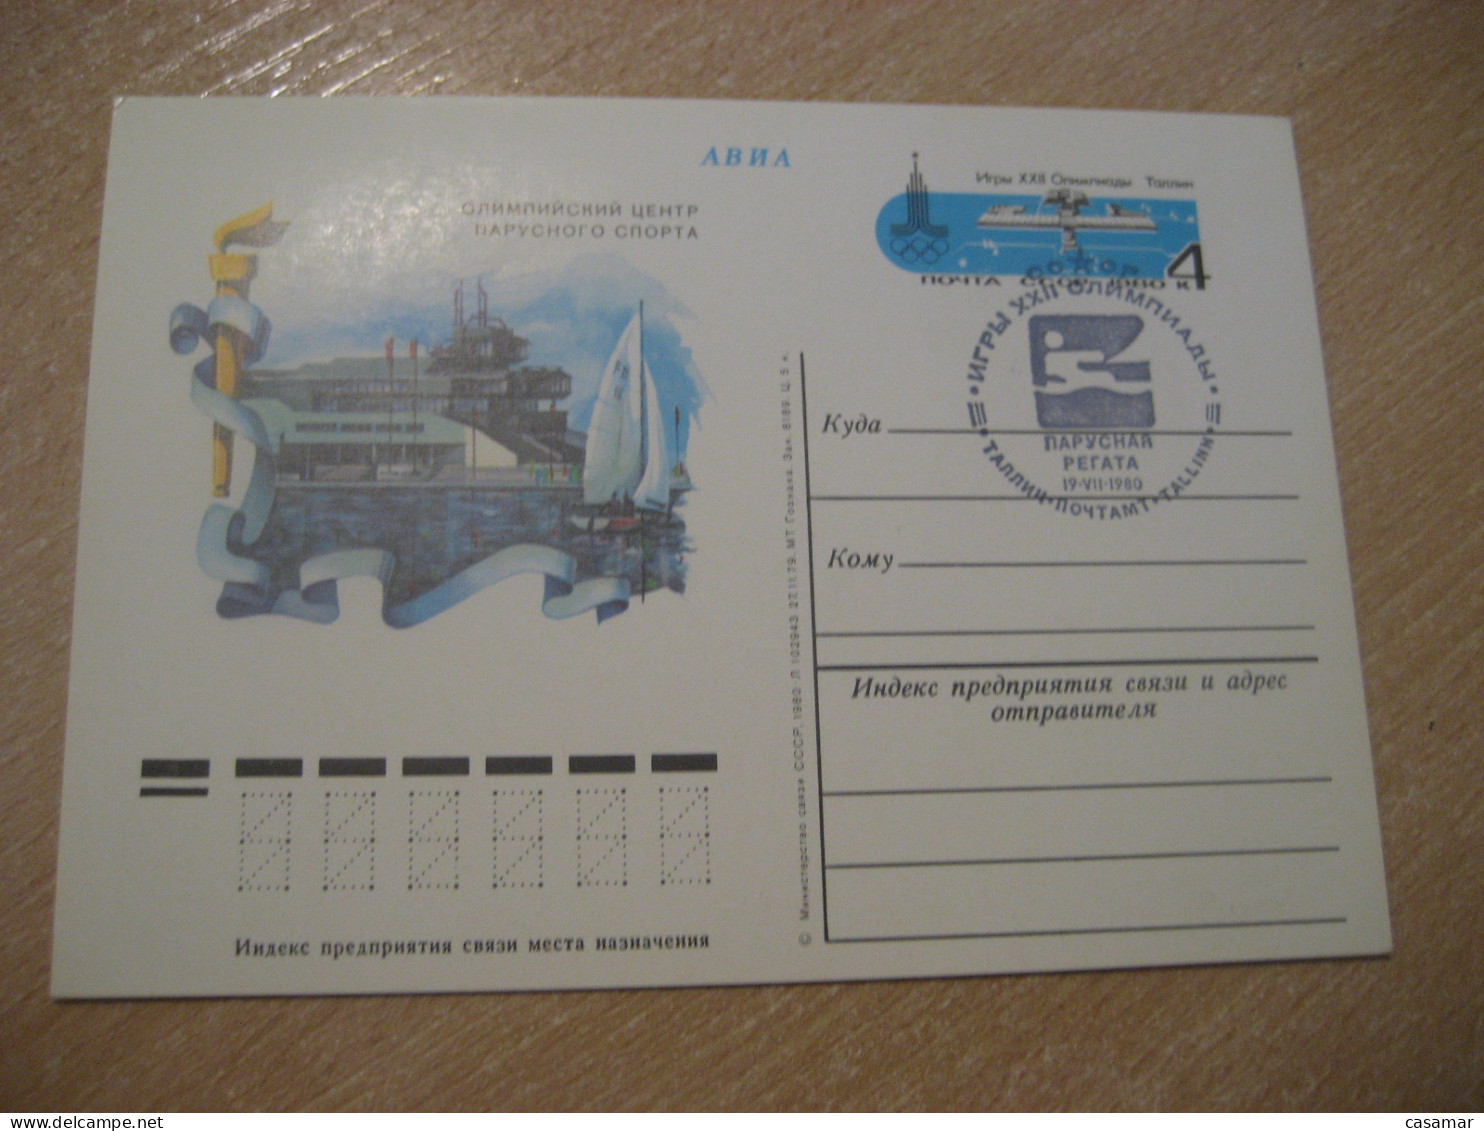 TALLINN 1980 Sail Sailing Moscow Olympic Games Olympics Torch Cancel Postal Stationery Card RUSSIA USSR - Ete 1980: Moscou